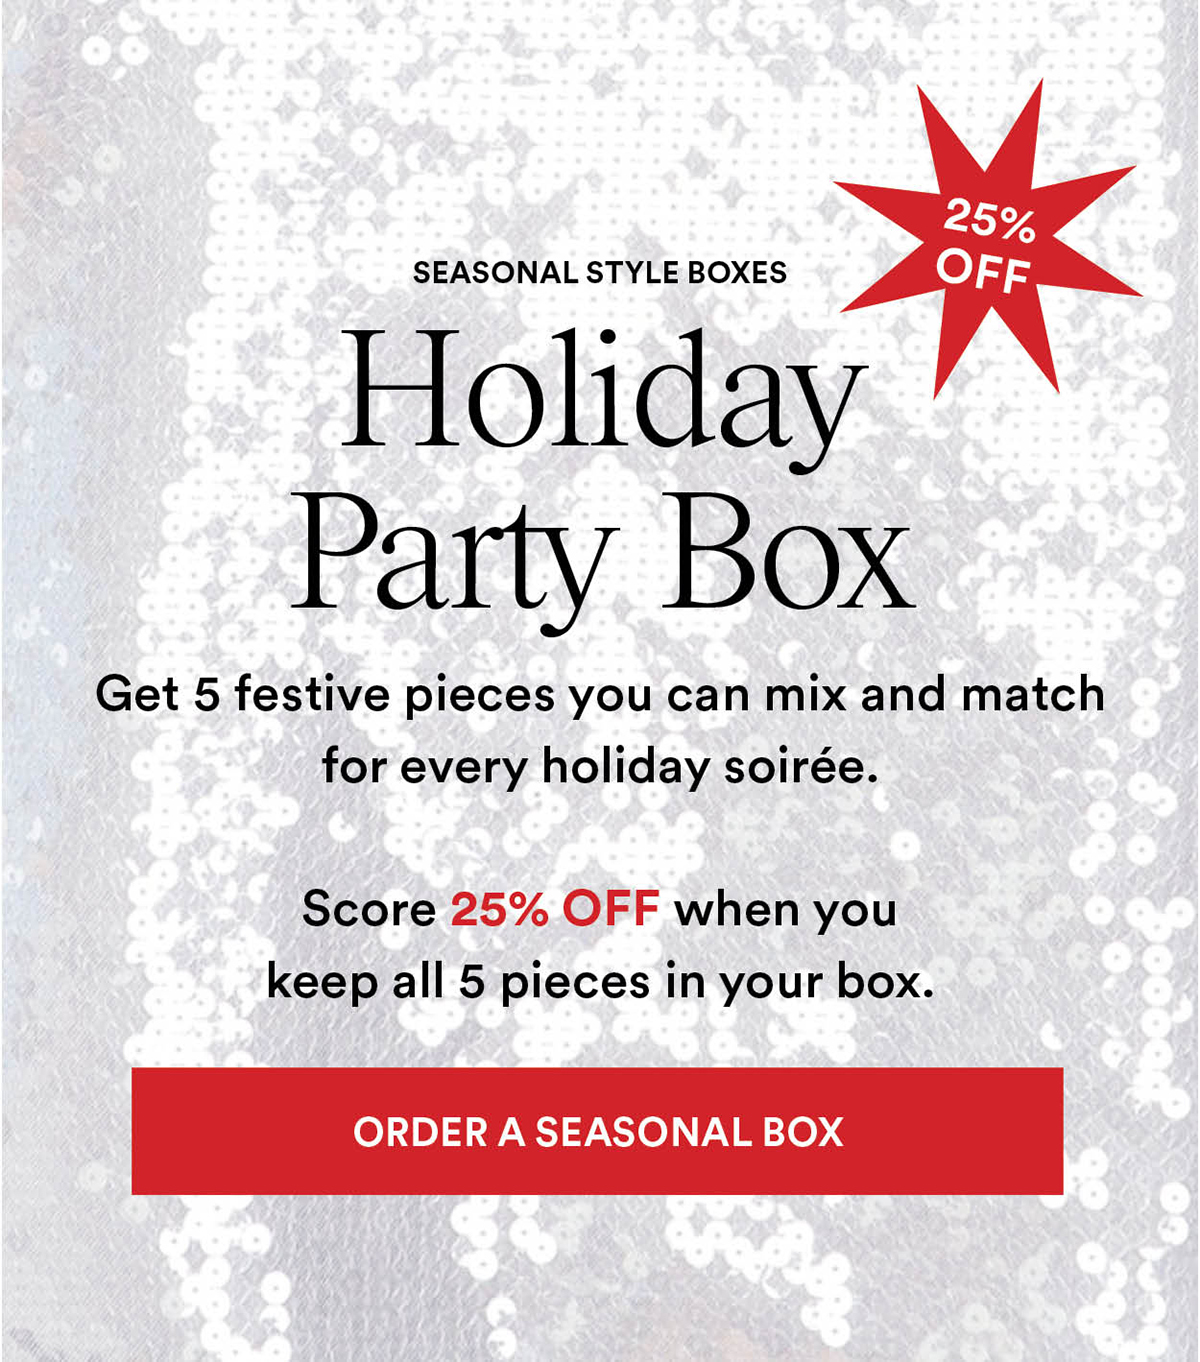 Seasonal Style Boxes. Holiday Party Box. Get 5 festive pieces you can mix and match for every holiday soire. Score 25% OFF when you keep all 5 pieces in your box. Order a Seasonal Box.